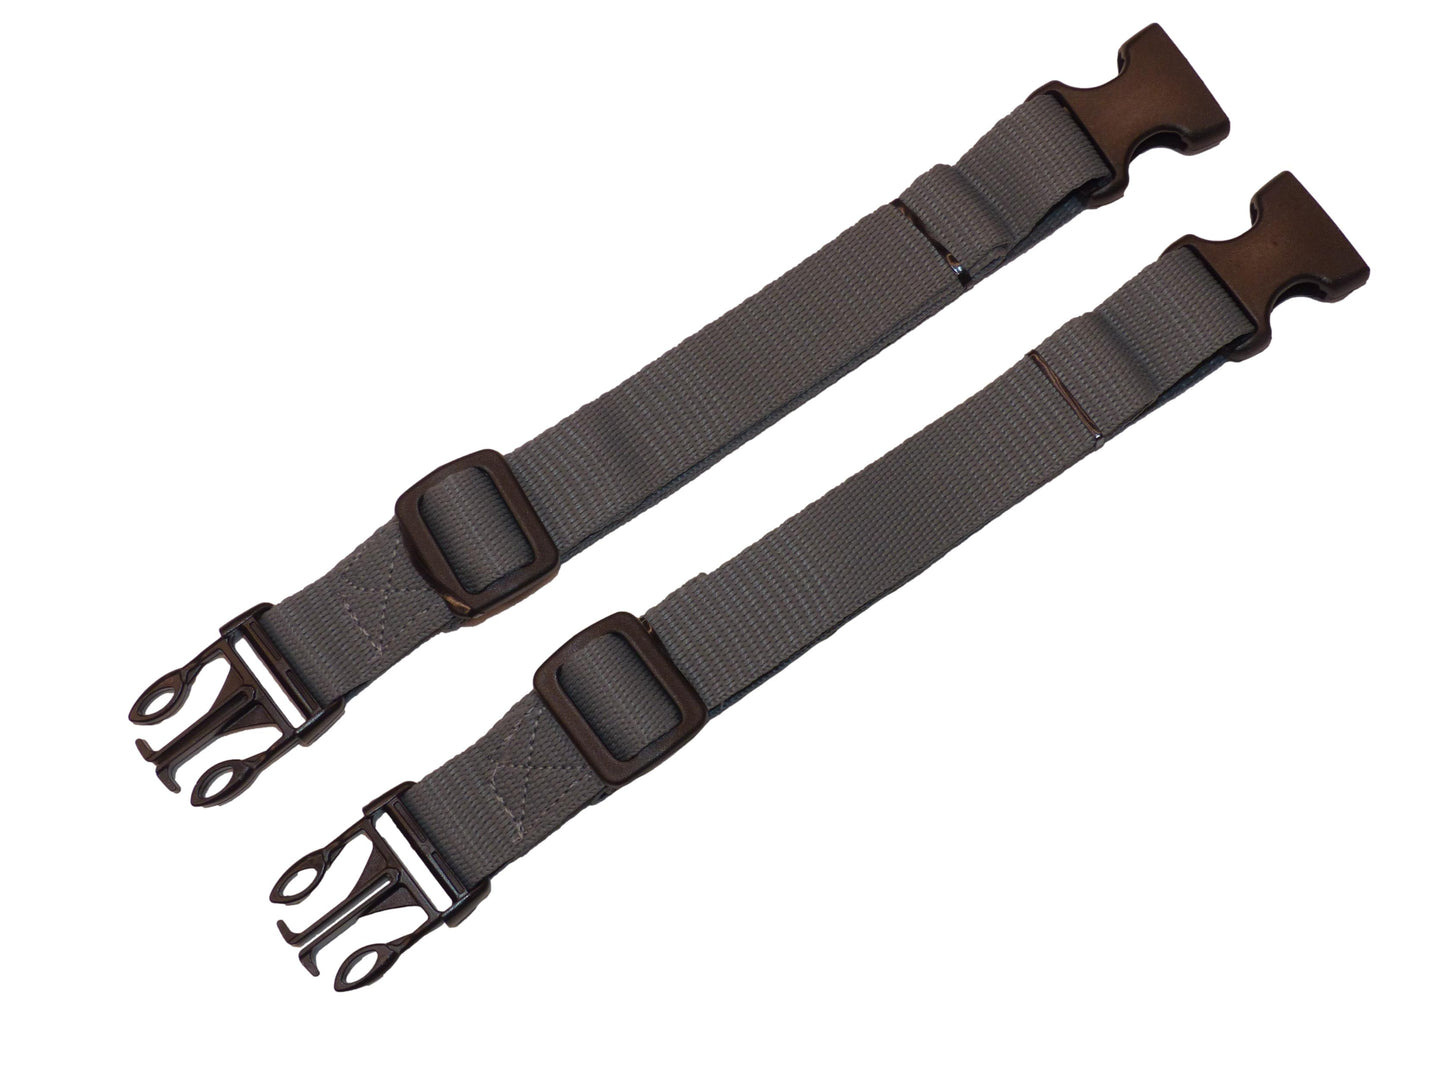 25mm Webbing Strap with Quick Release & Length-Adjusting Buckles (Pair) in grey